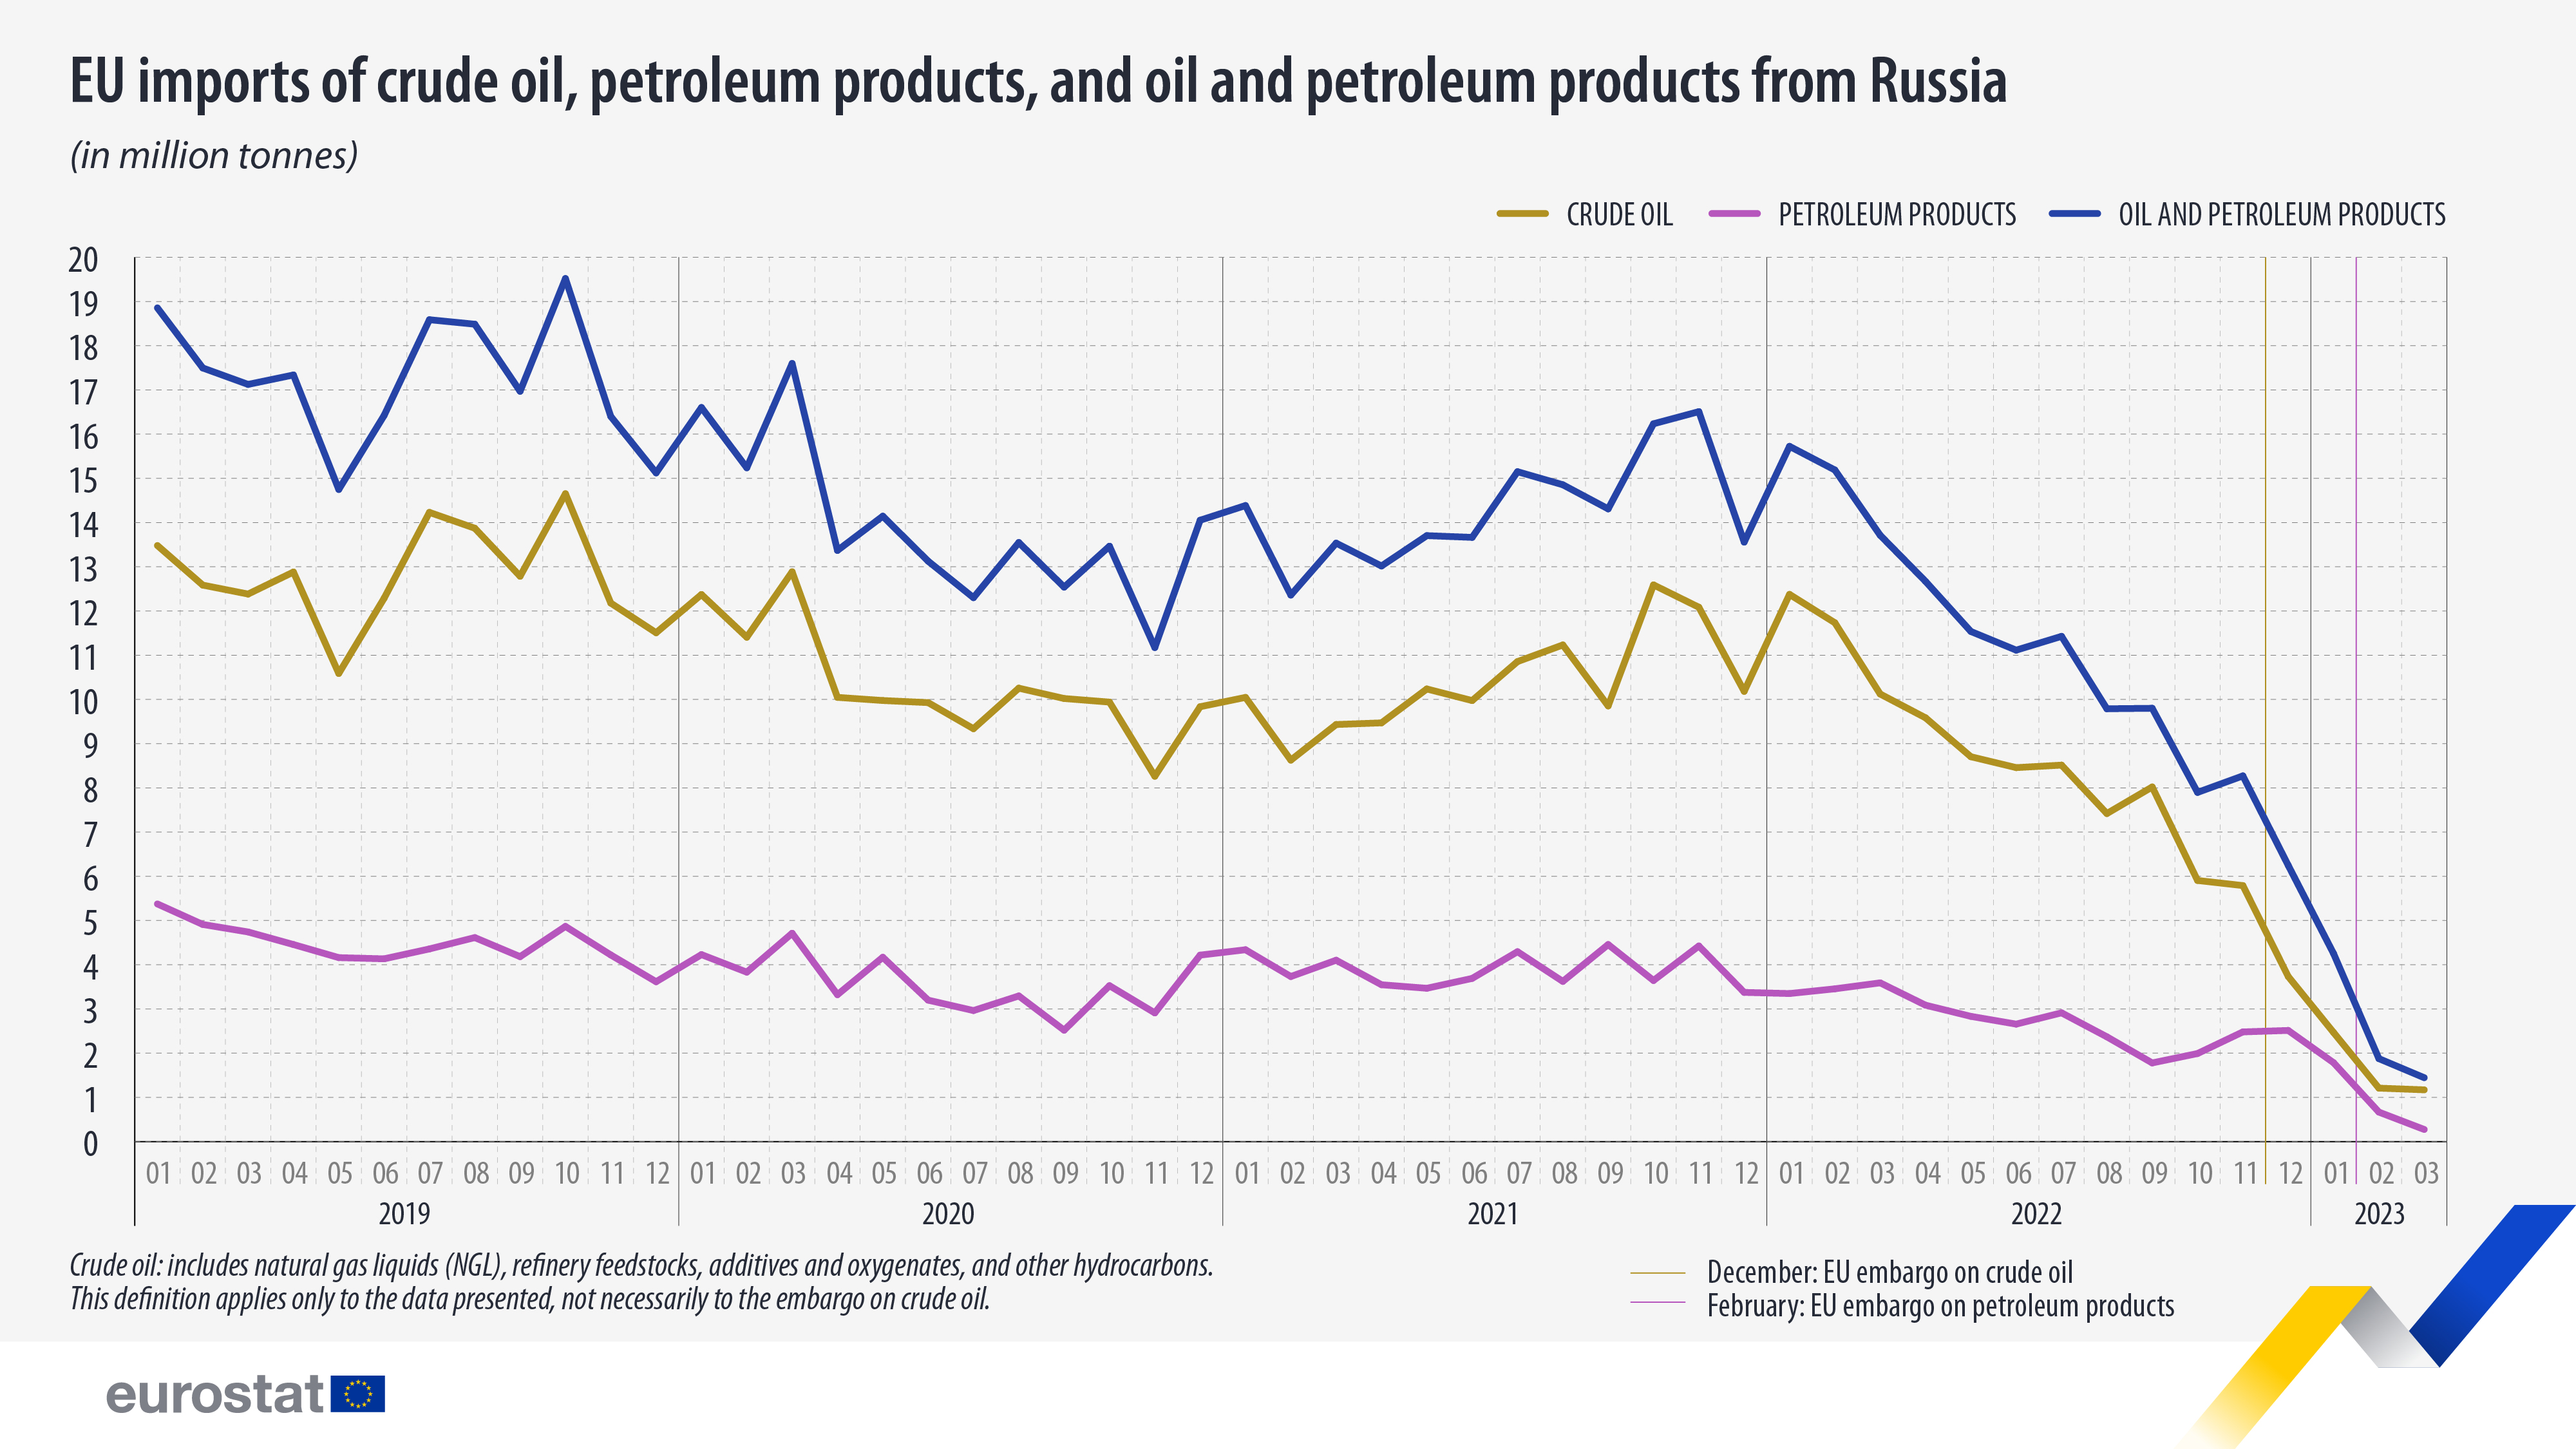 Line graph: EU imports of crude oil, petroleum products, and oil and petroleum products from Russia, in million tonnes, between January 2019 and March 2023